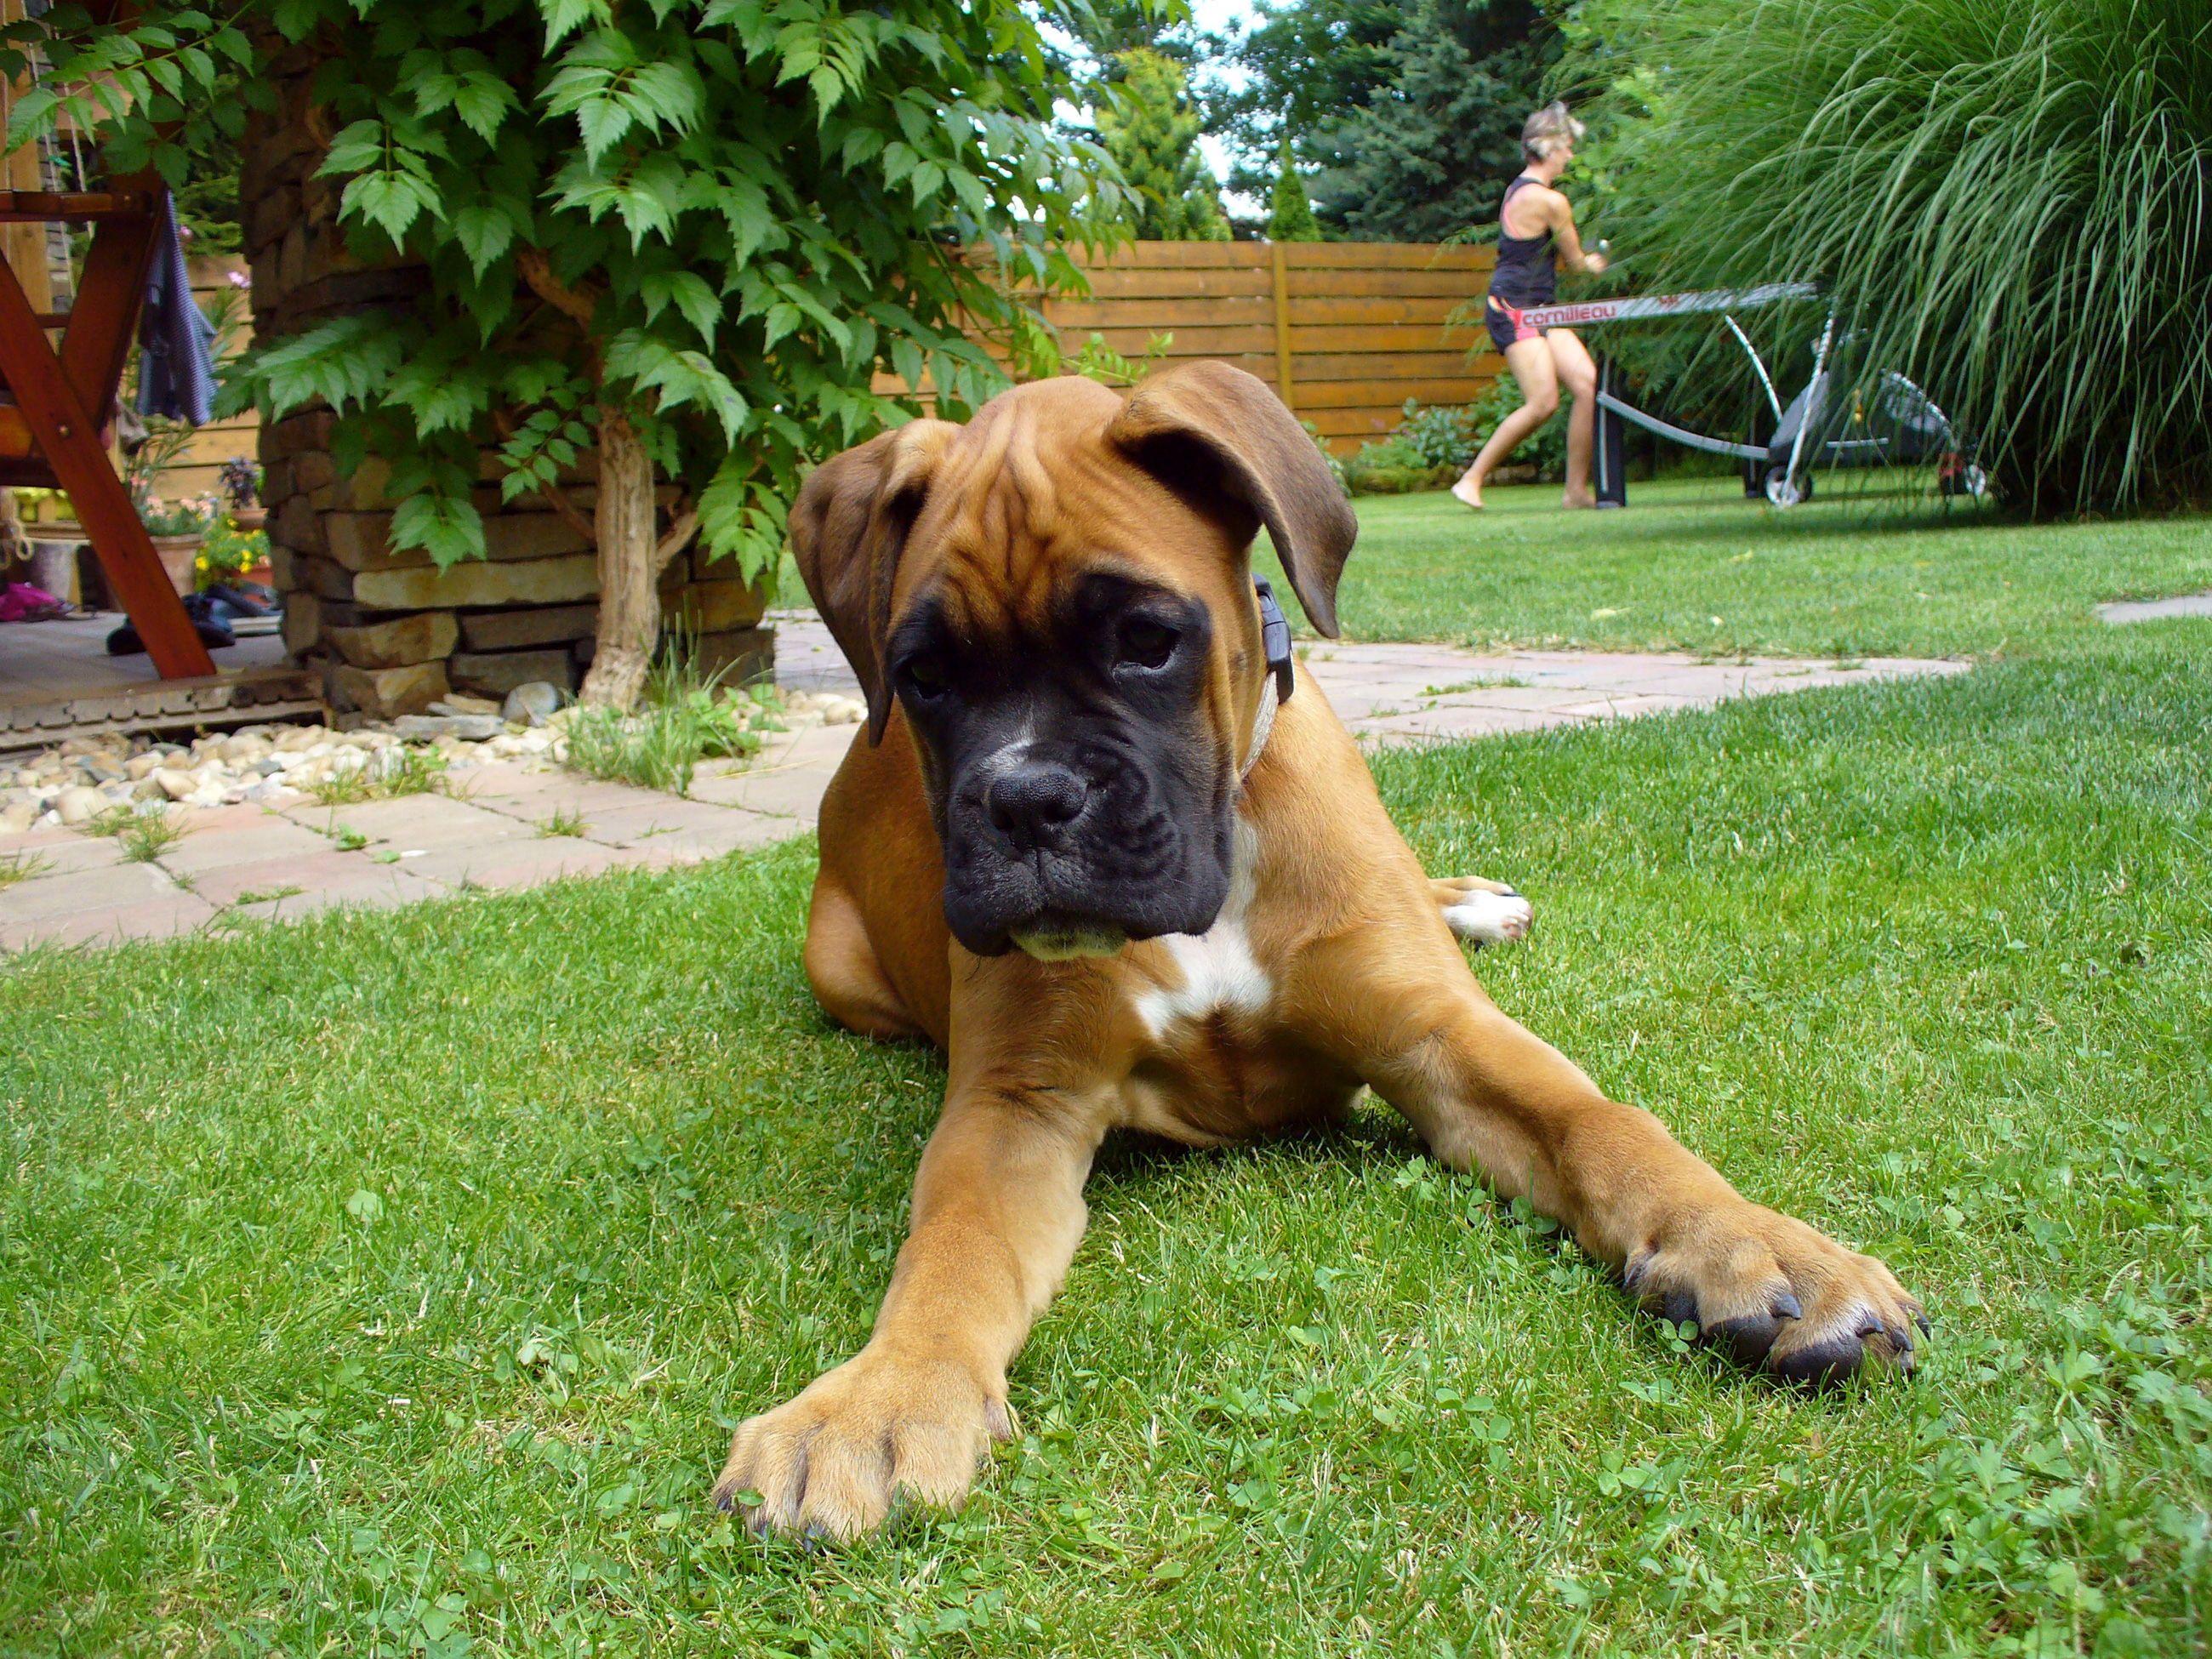 Transitivity allows children to understand that this boxer puppy, is a dog and a mammal.^[[Image](https://libreshot.com/boxer-puppy/) by [Martin Vorel](https://libreshot.com/about-libreshot/) is in the public domain]